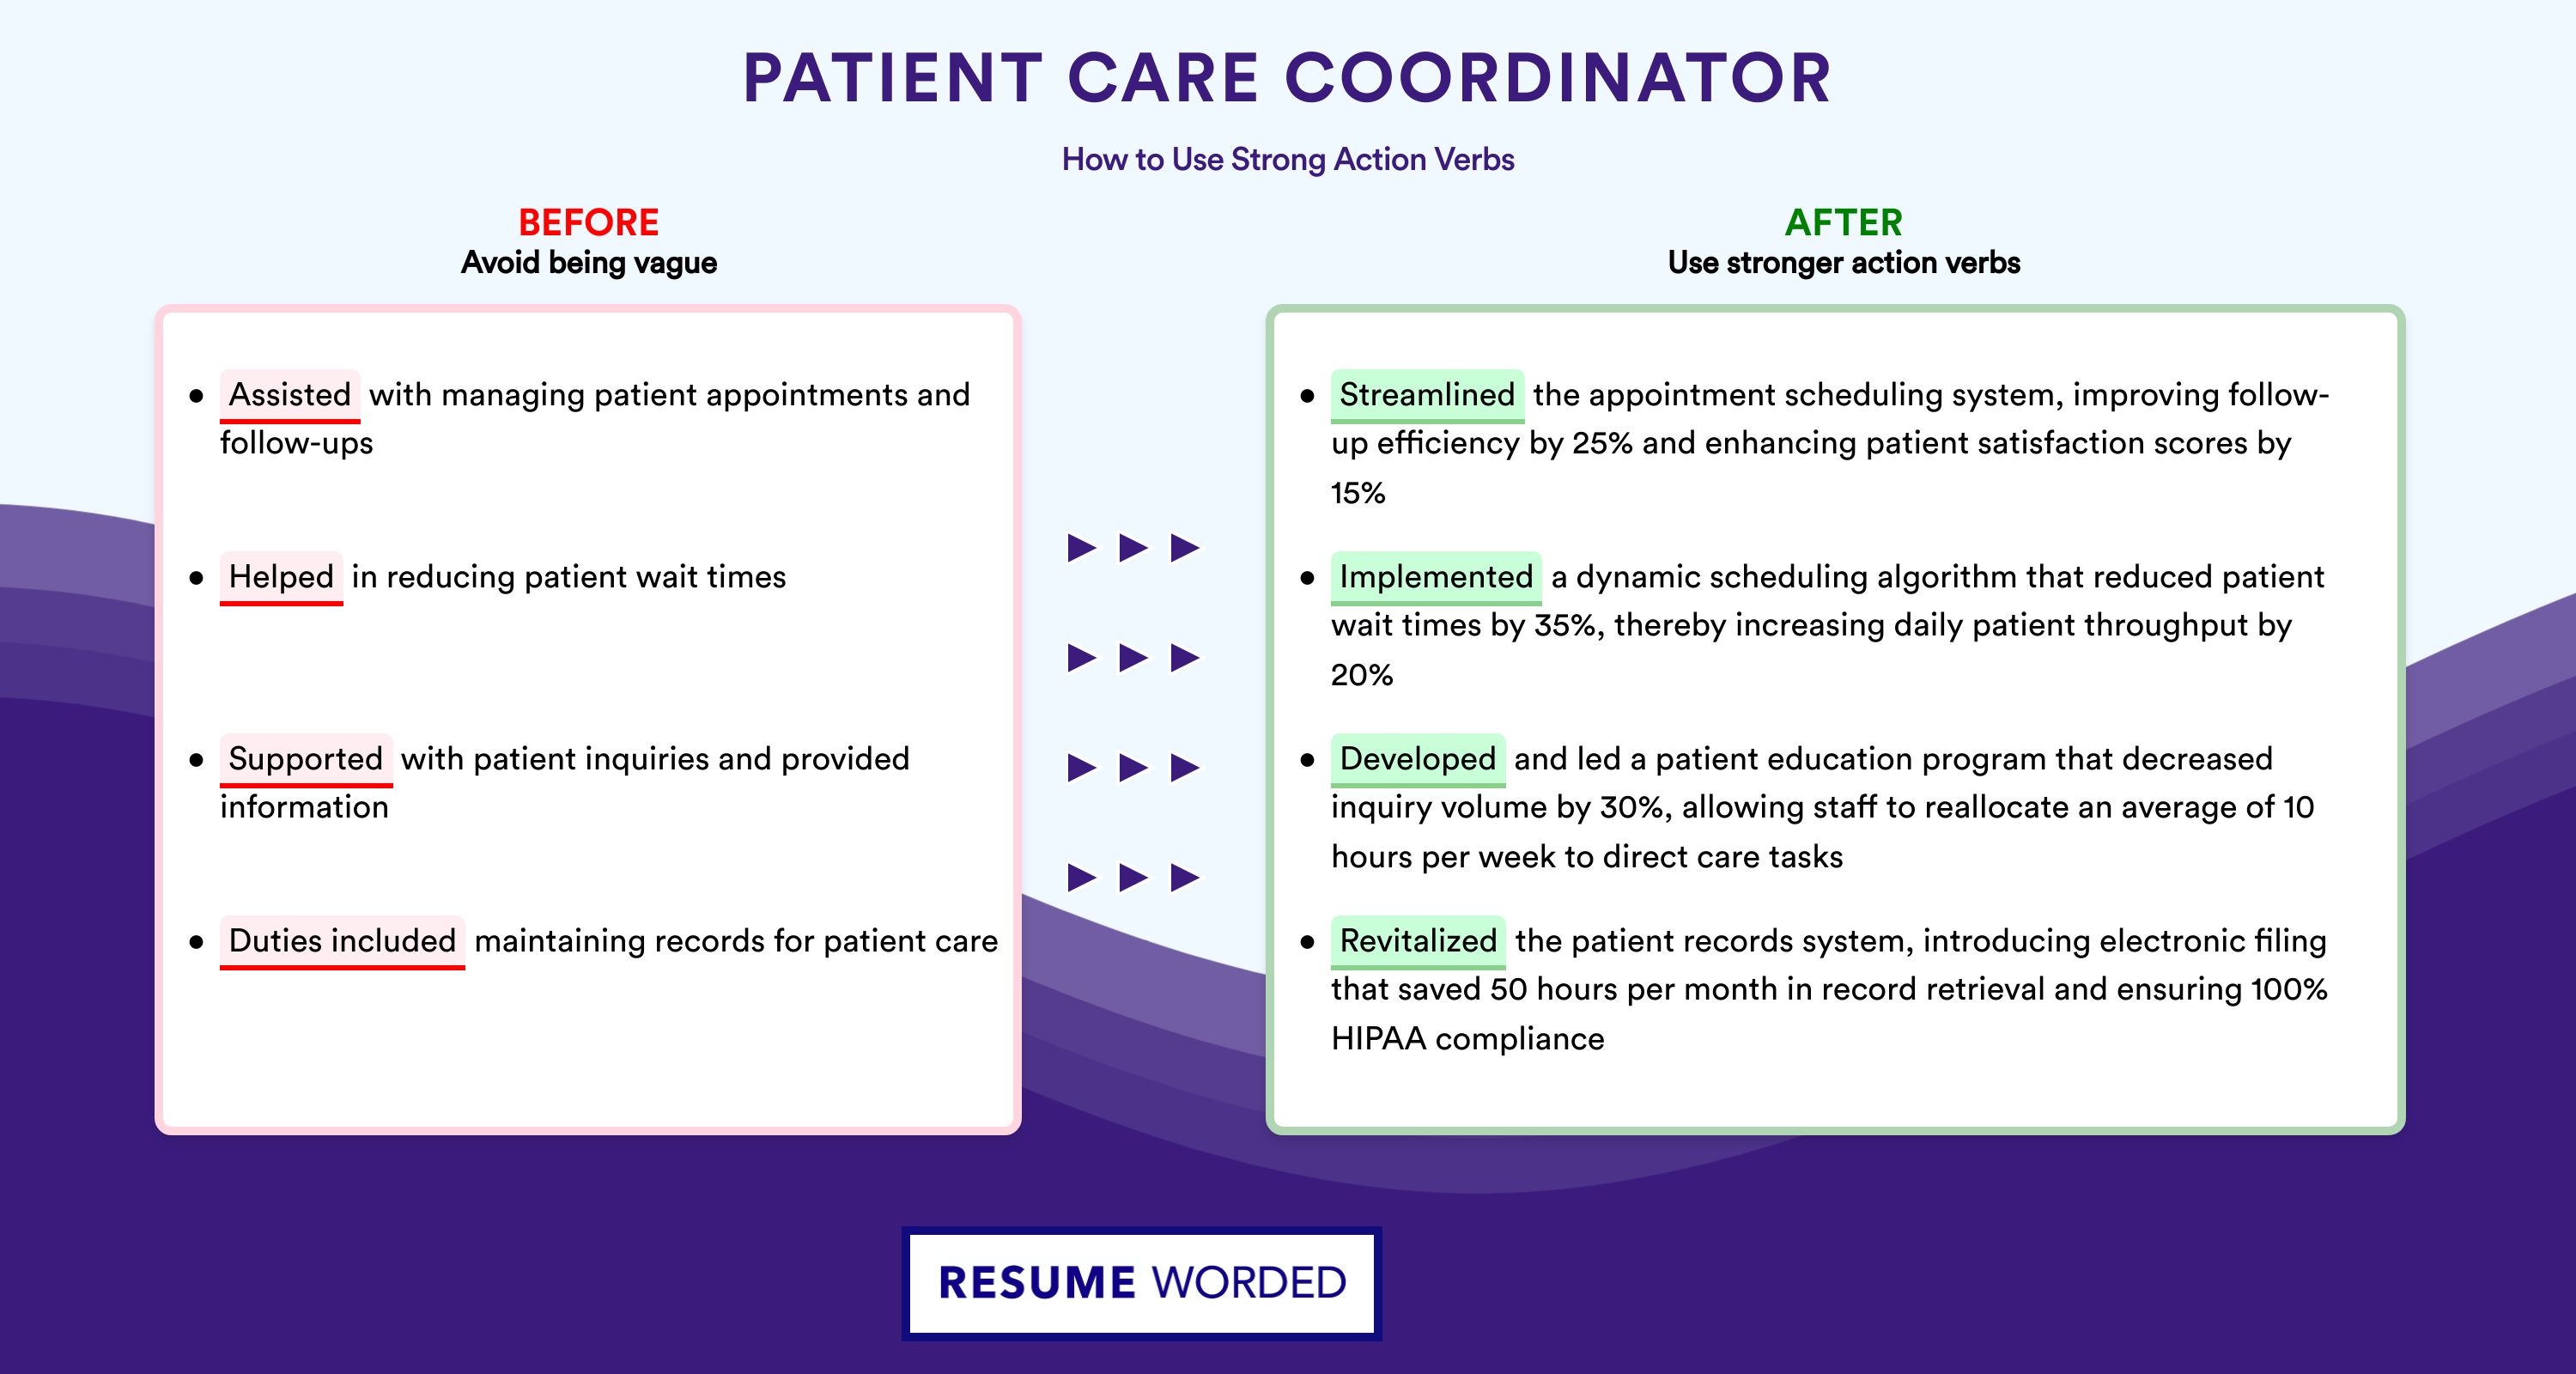 Action Verbs for Patient Care Coordinator